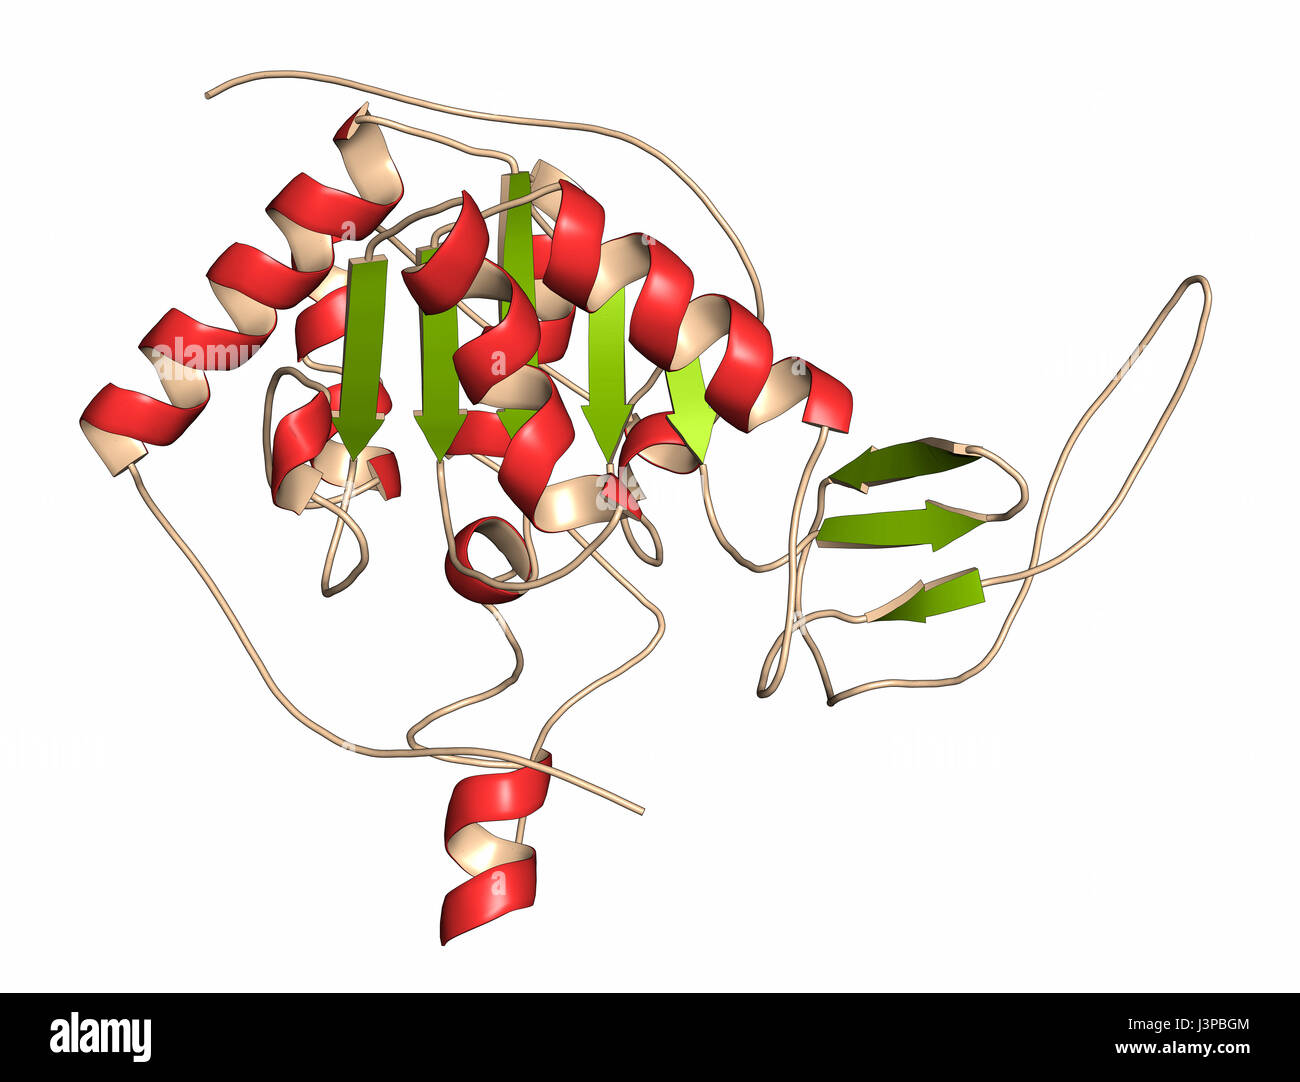 Sirtuin 6 (SIRT6) protein. Linked to longevity in mammals. Cartoon representation. Secondary structure coloring. Stock Photo